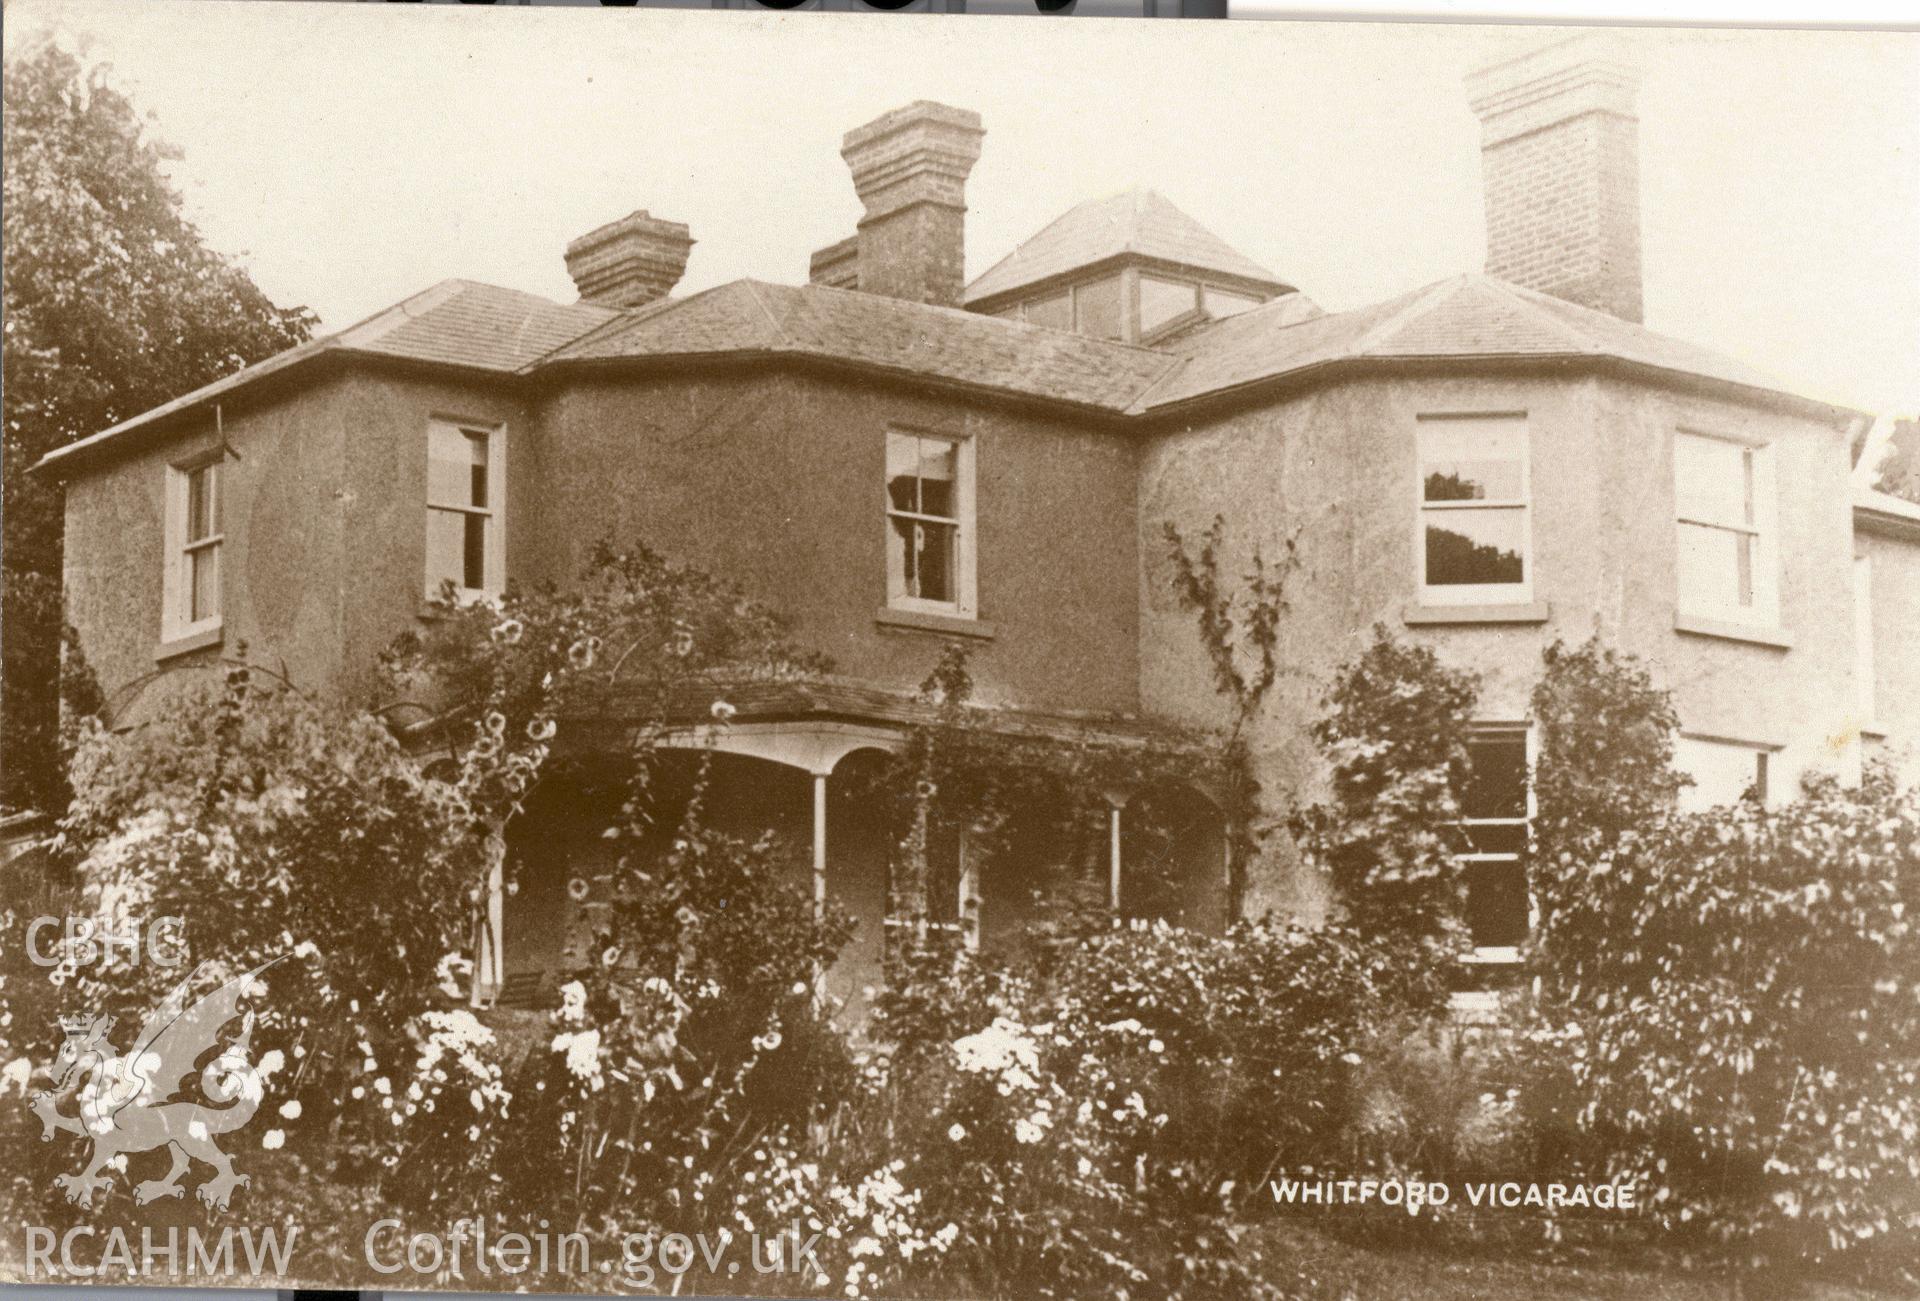 Digitised postcard image of Vicarage, Whitford. Produced by Parks and Gardens Data Services, from an original item in the Peter Davis Collection at Parks and Gardens UK. We hold only web-resolution images of this collection, suitable for viewing on screen and for research purposes only. We do not hold the original images, or publication quality scans.